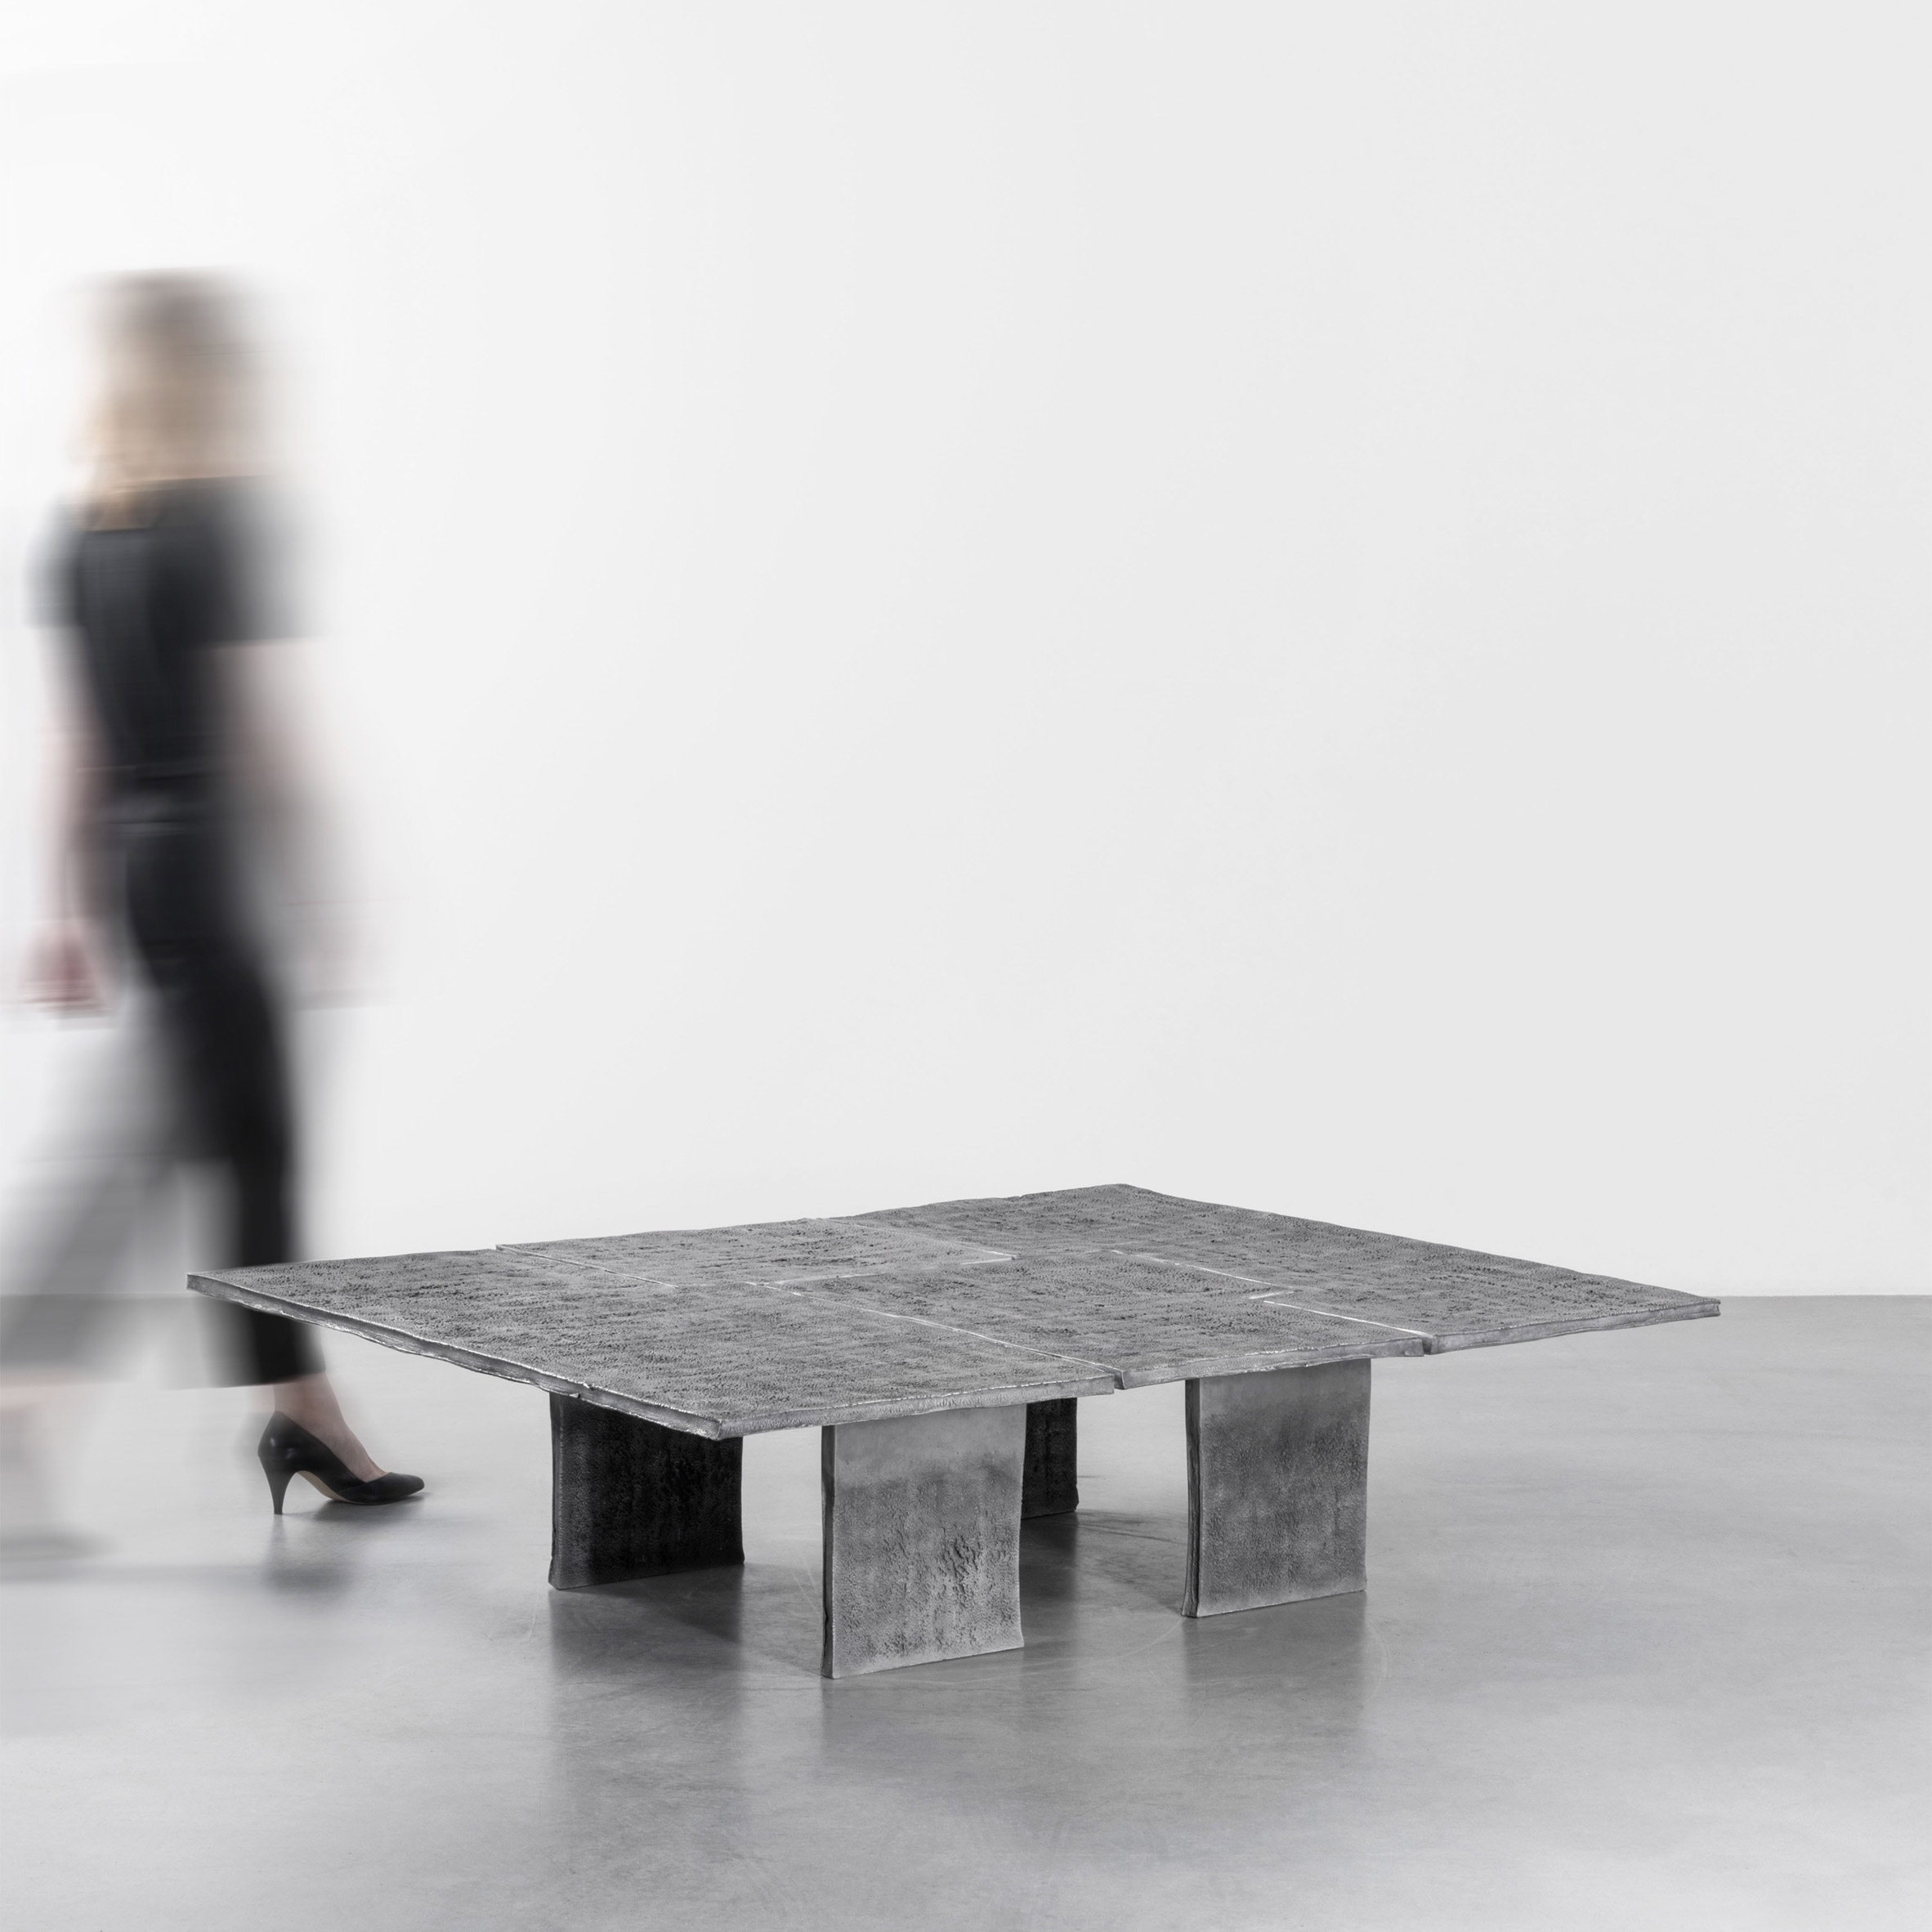 Vincent Dubourg's Vortex aluminium furniture goes on show in New York-15